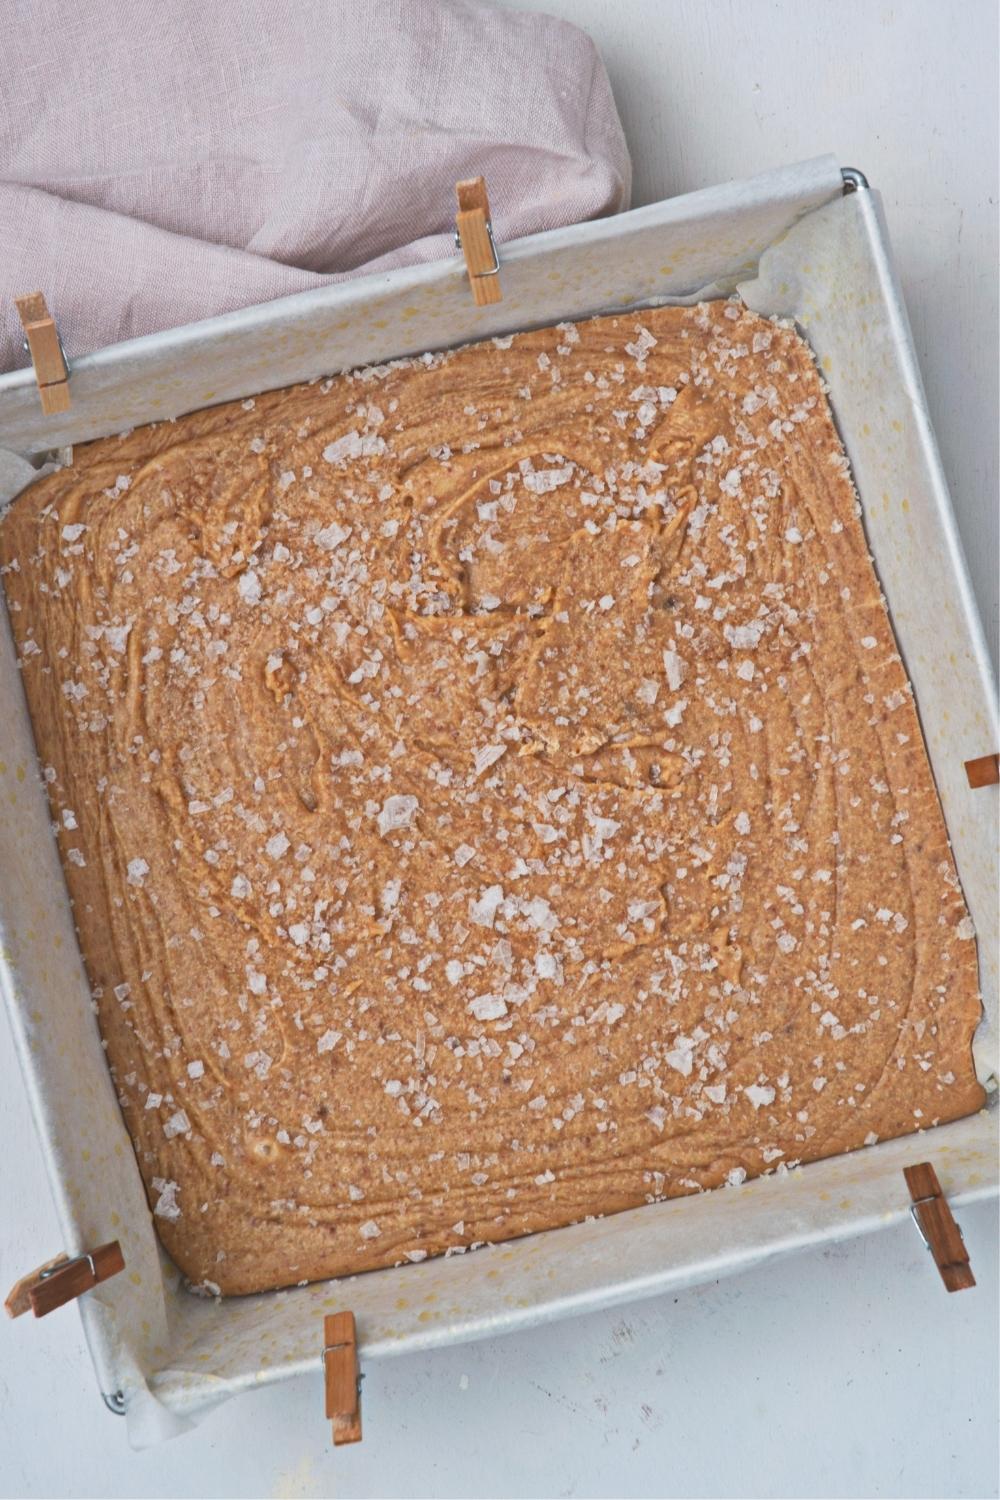 An overhead view of a square pan lined with parchment paper containing caramel fudge that has been set for two hours.